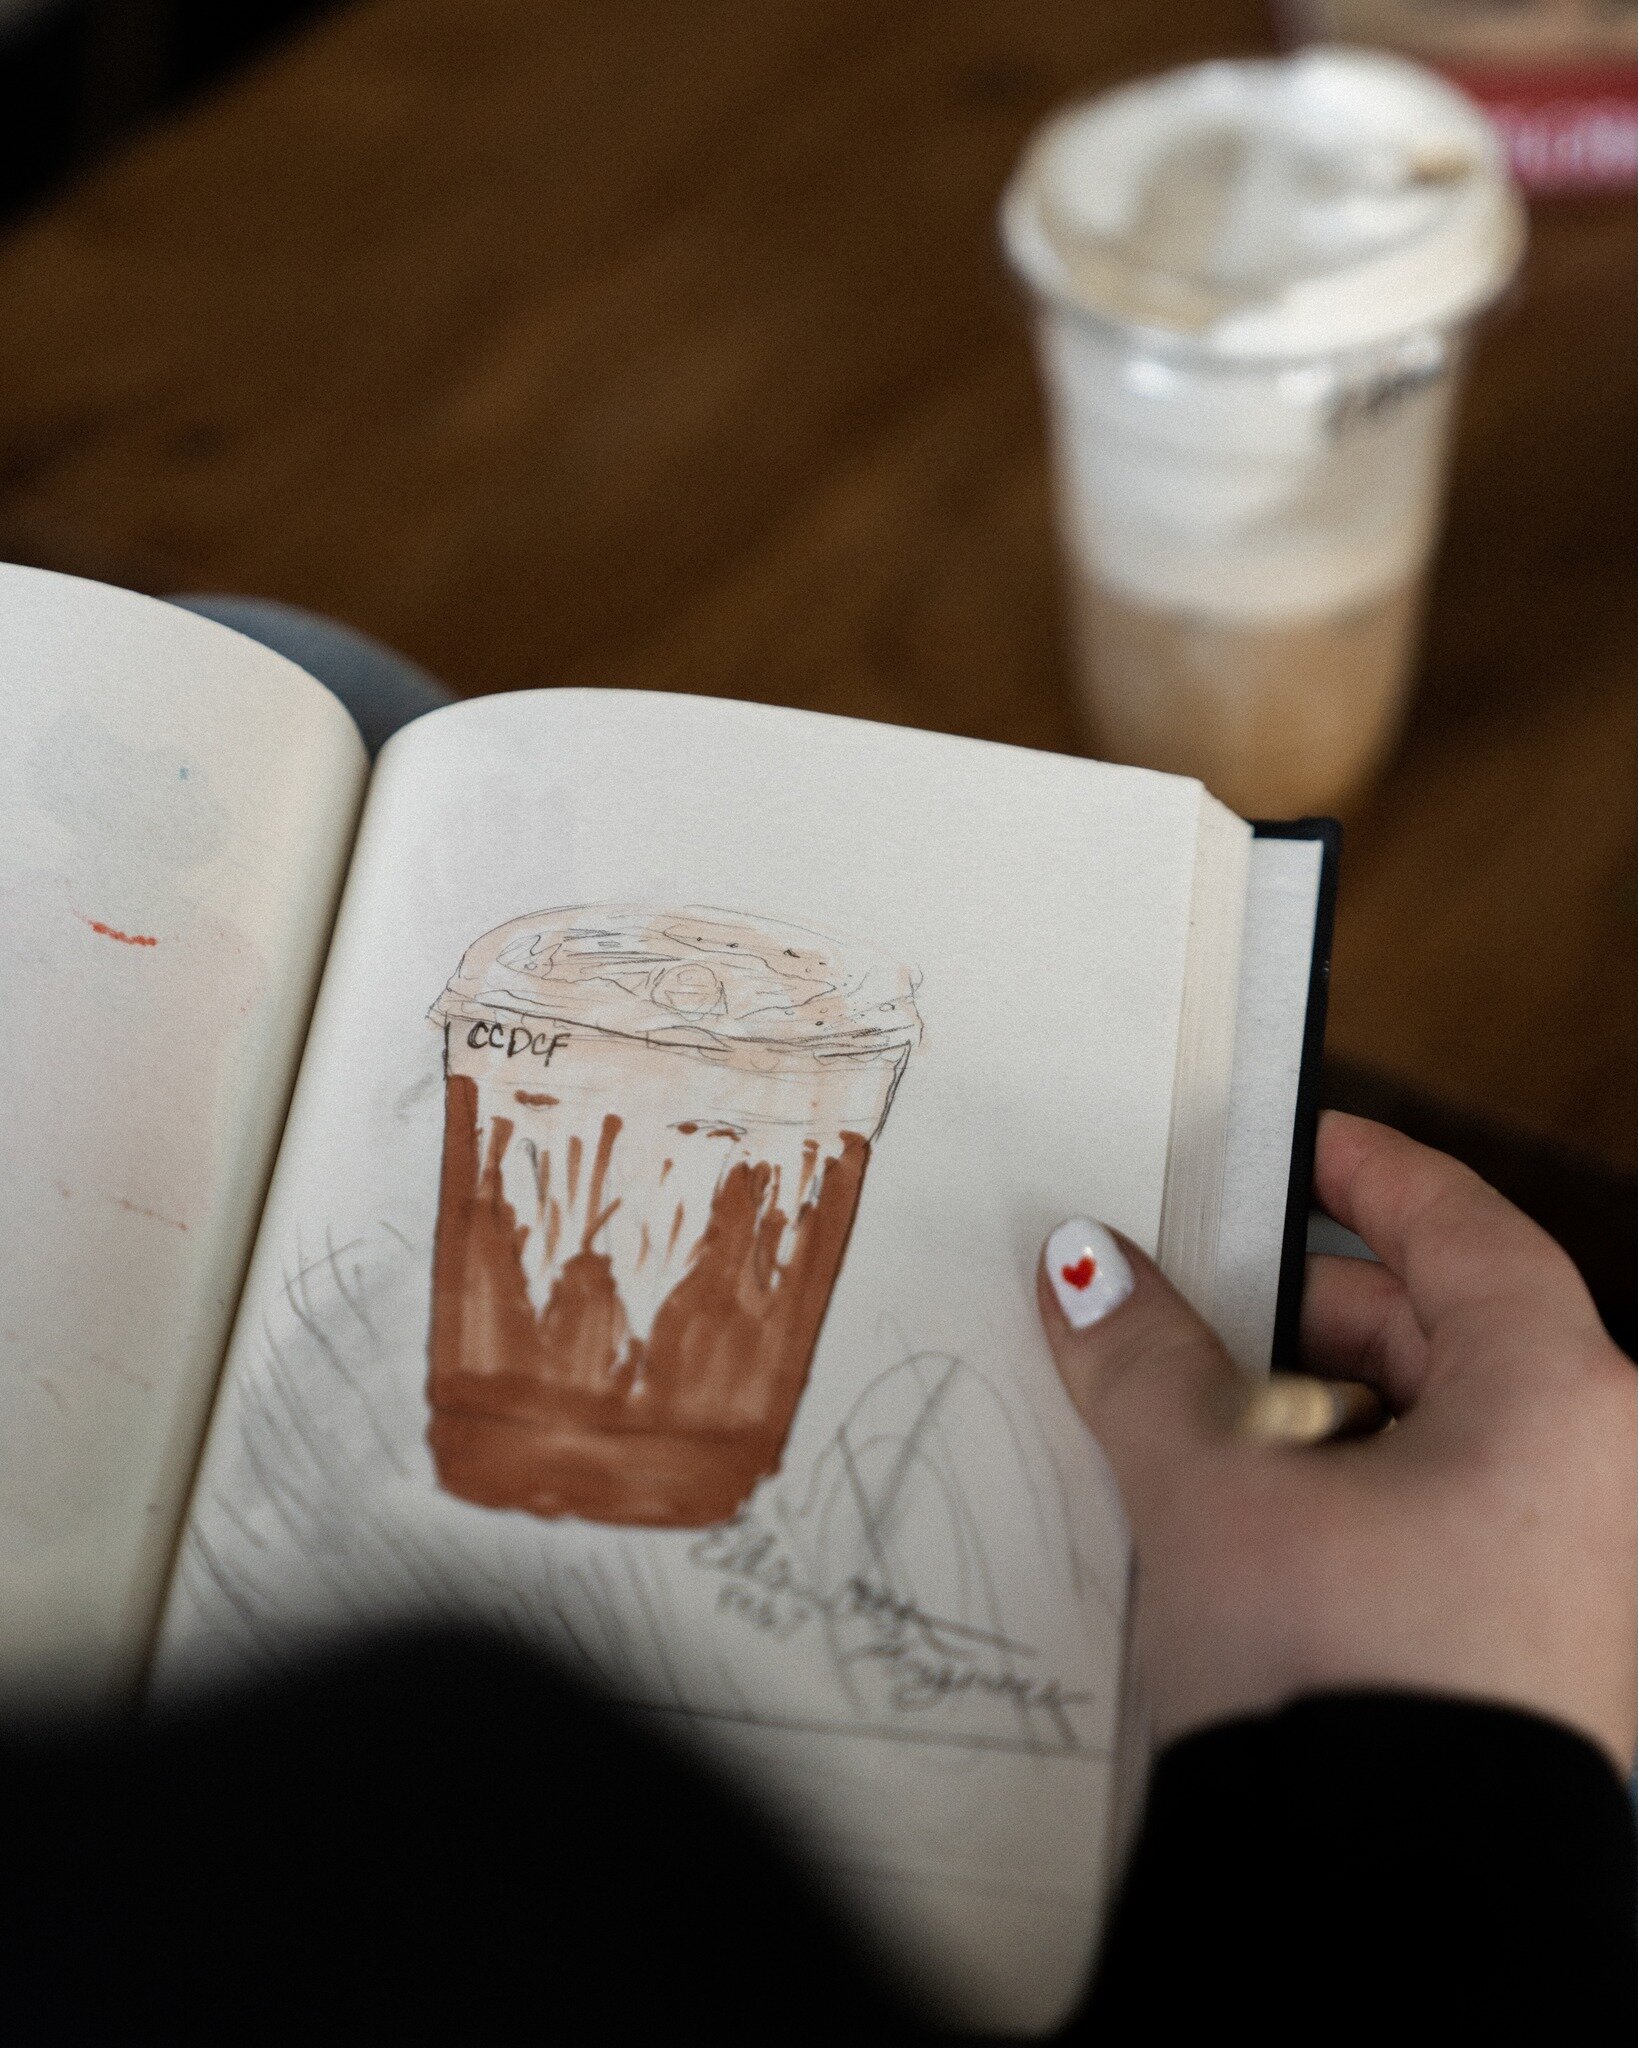 We have plenty of menu items you can draw pictures of! 

We love watching your creativity brew at the shop. Whether you're working on a new idea or writing the next great American novel, we are here for it!

____

&bull;

&bull;

#groundedcoffeeandcr